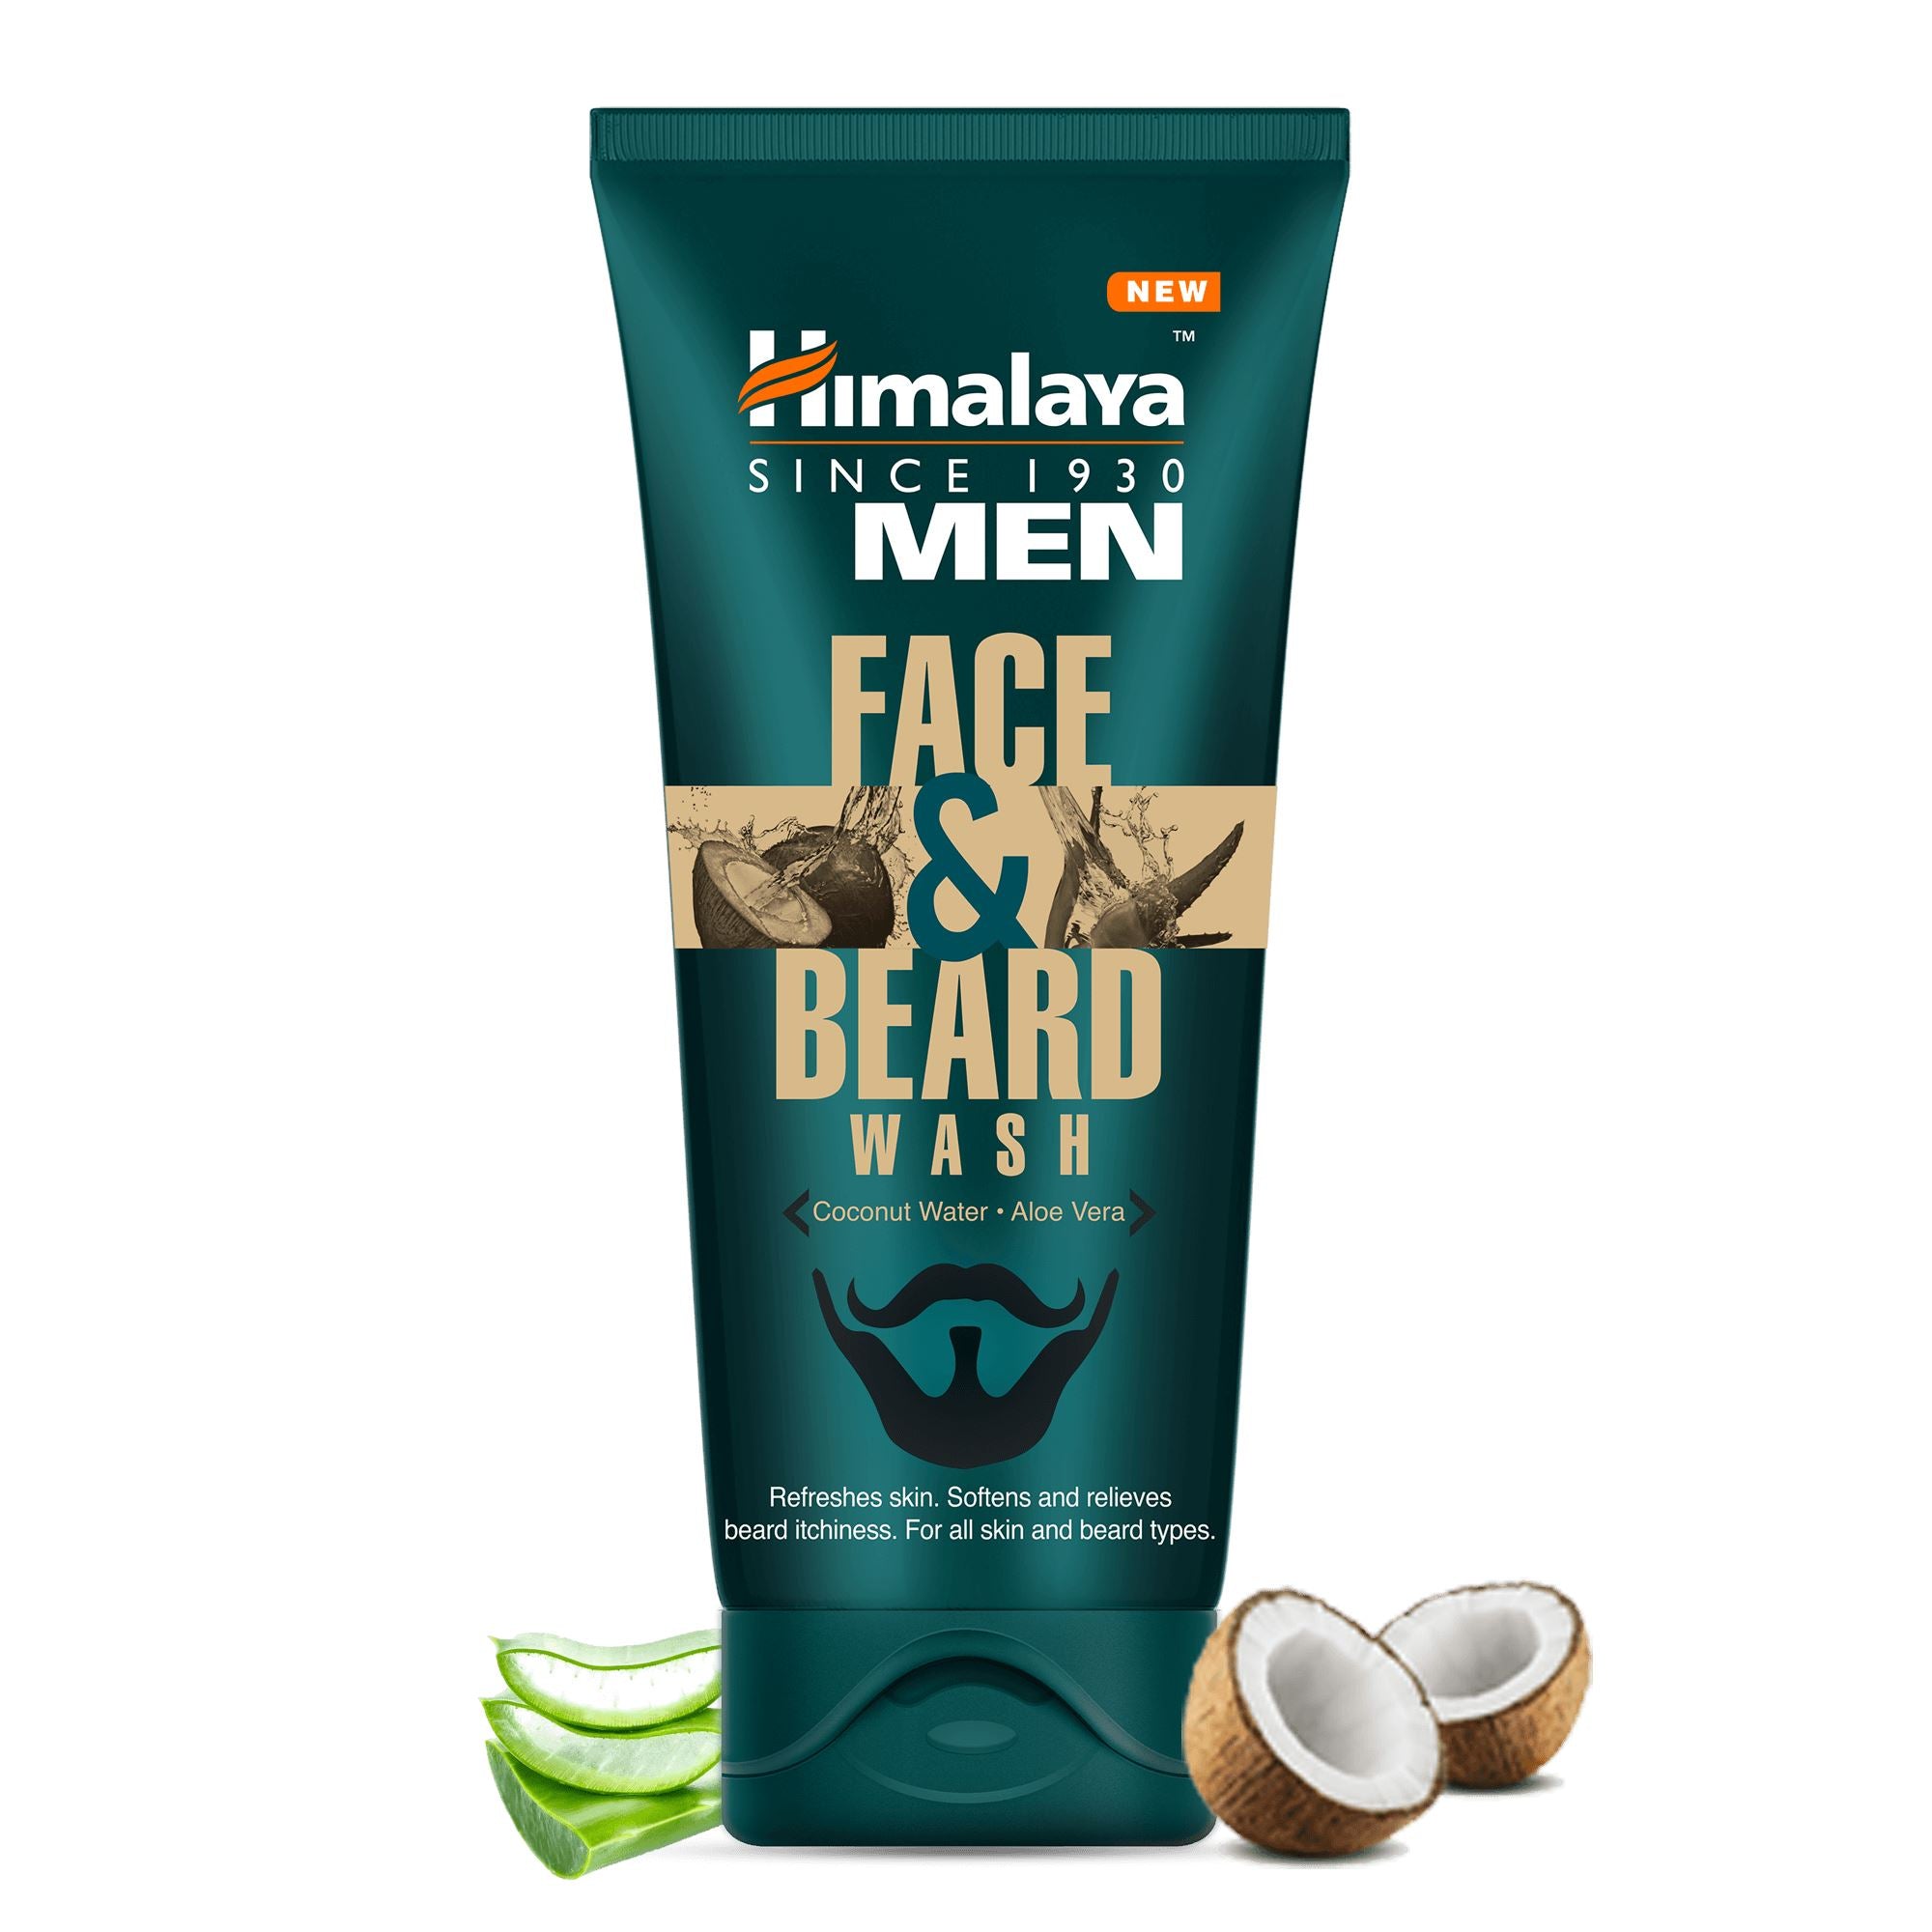 Himalaya Men Face and Beard Wash - Relieves beard itchiness & refreshes skin